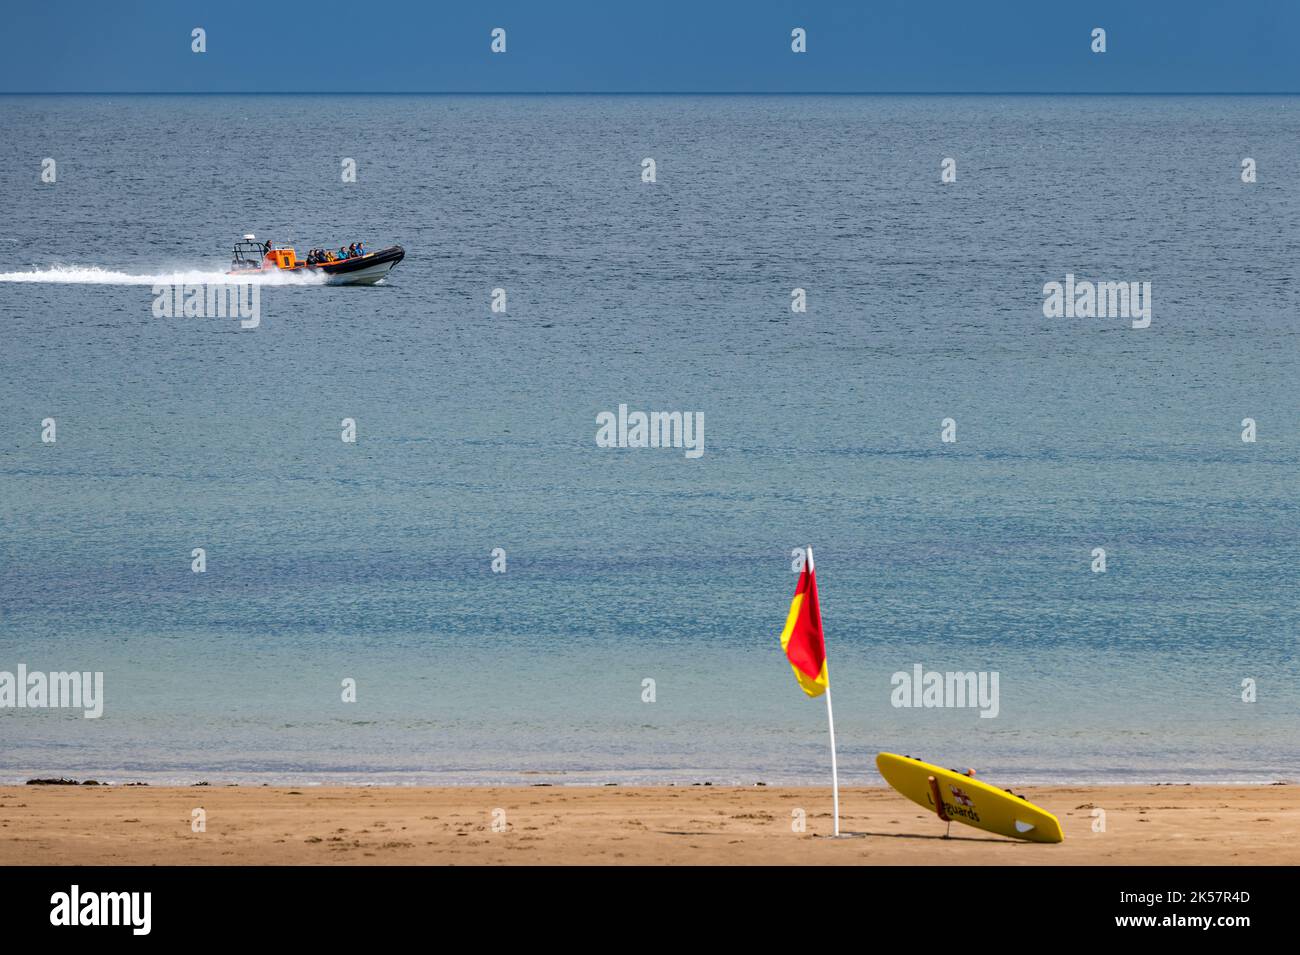 Tourists in a rigid inflatable boat in Summer weather, near beach with lifeguard flag Coldingham Bay, Berwickshire, Scotland, UK Stock Photo